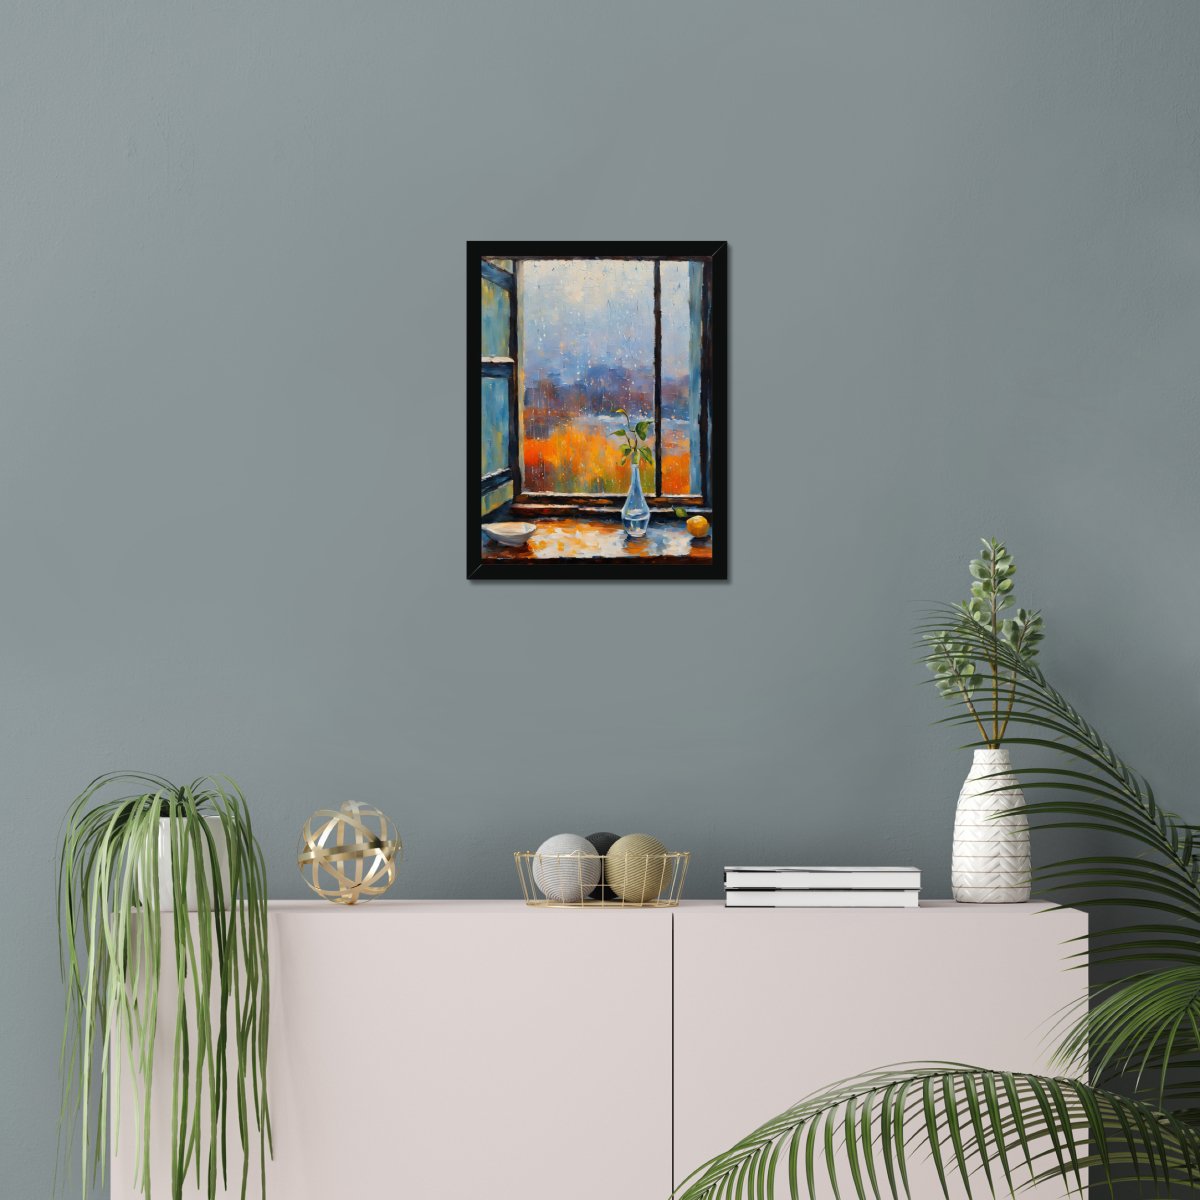 Window vase - Art print - Poster - Ever colorful